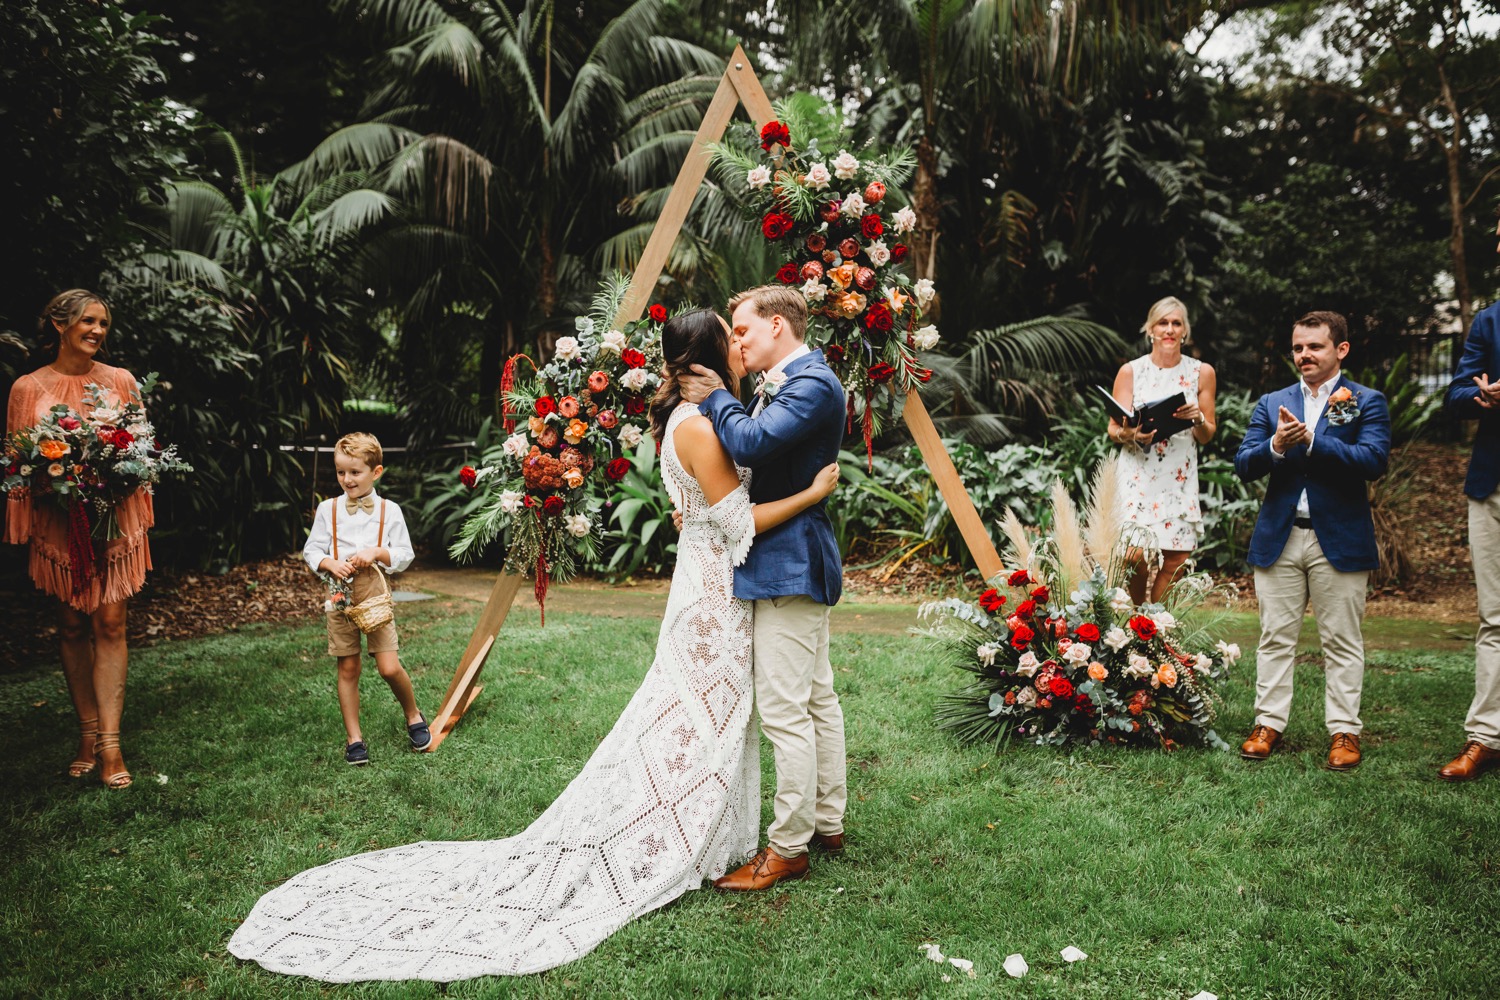 Newly married couple embracing in front of floral arch in the gardens. The bride wears a white dress and the groom wears a blue blazer and light pants. The celebrant wearing a light coloured dress is the background, as well as a bridesmaid in a light colour dress, a groomsman in an outfit similar to the groom and there is a pageboy wearing a white shire and brown shorts. Everyone is very happy.